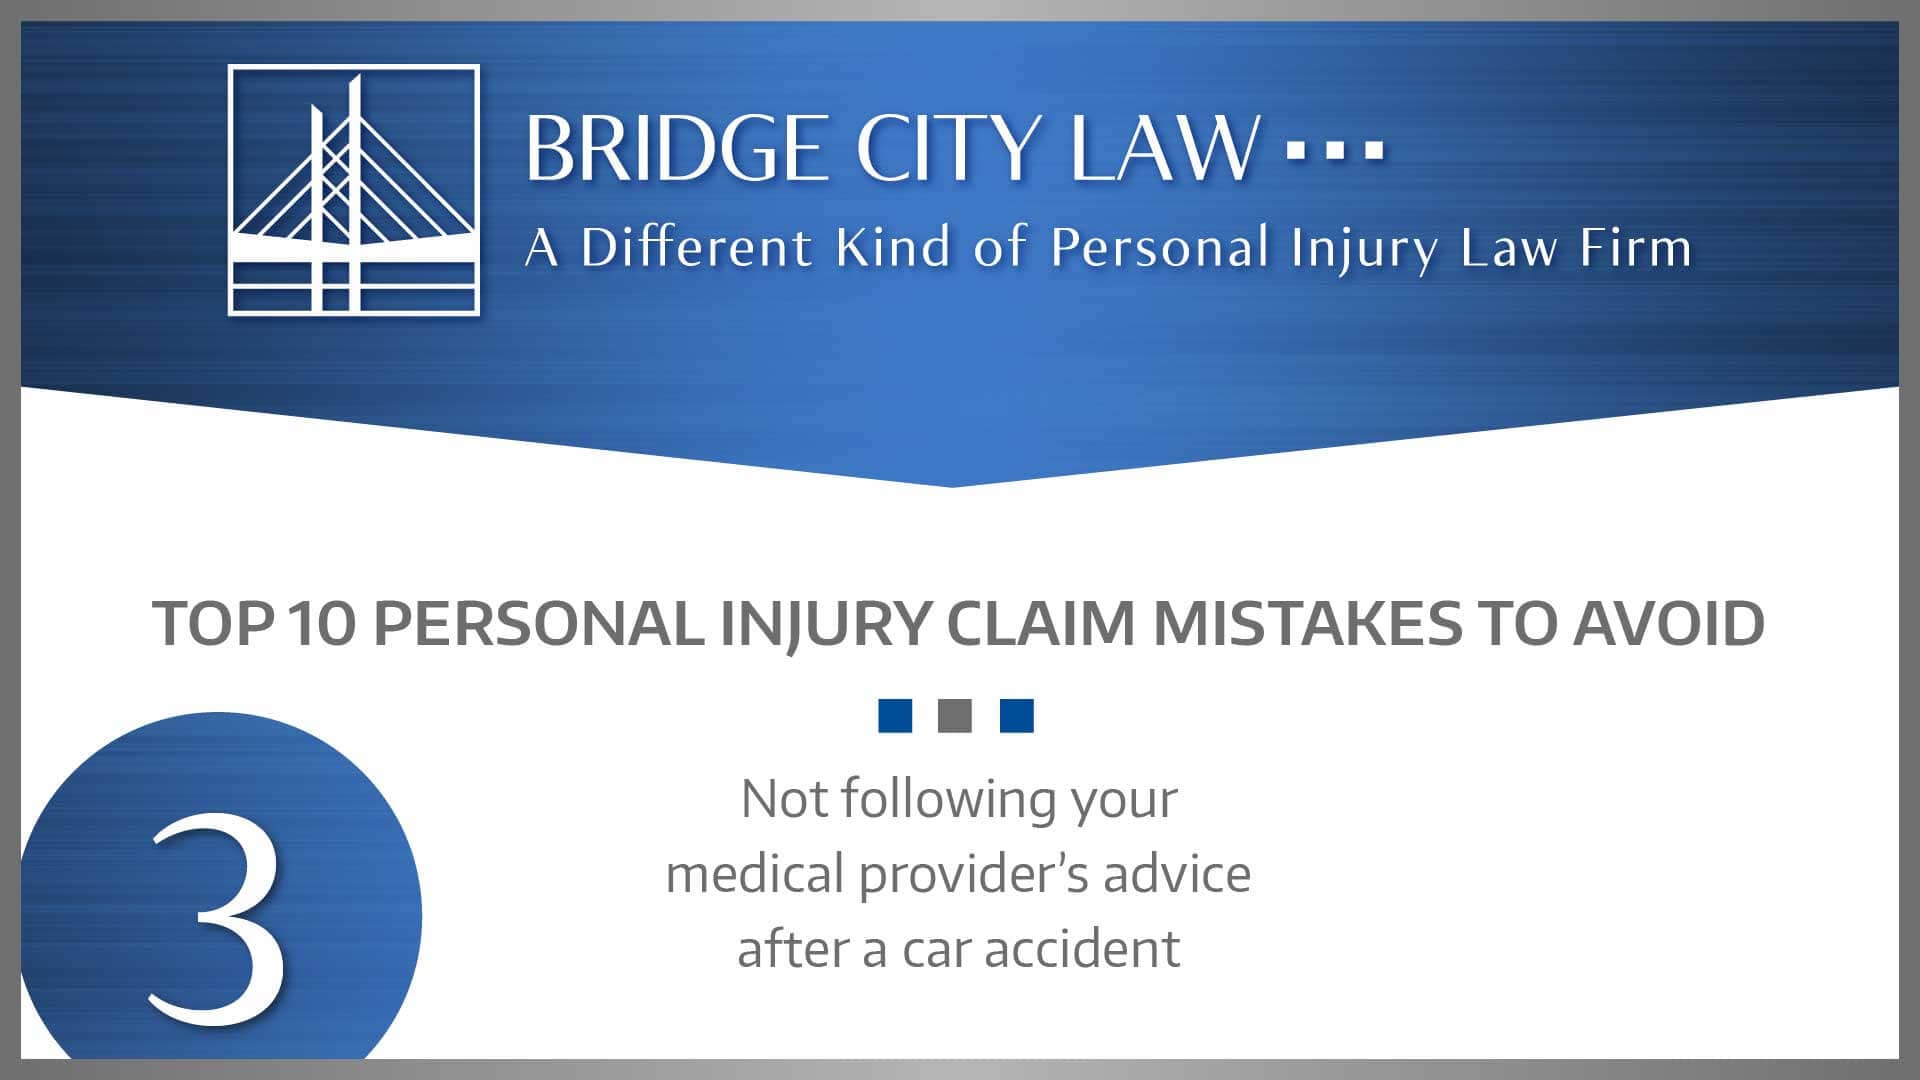 #3 MISTAKE: Not following your medical provider’s advice after a car accident.